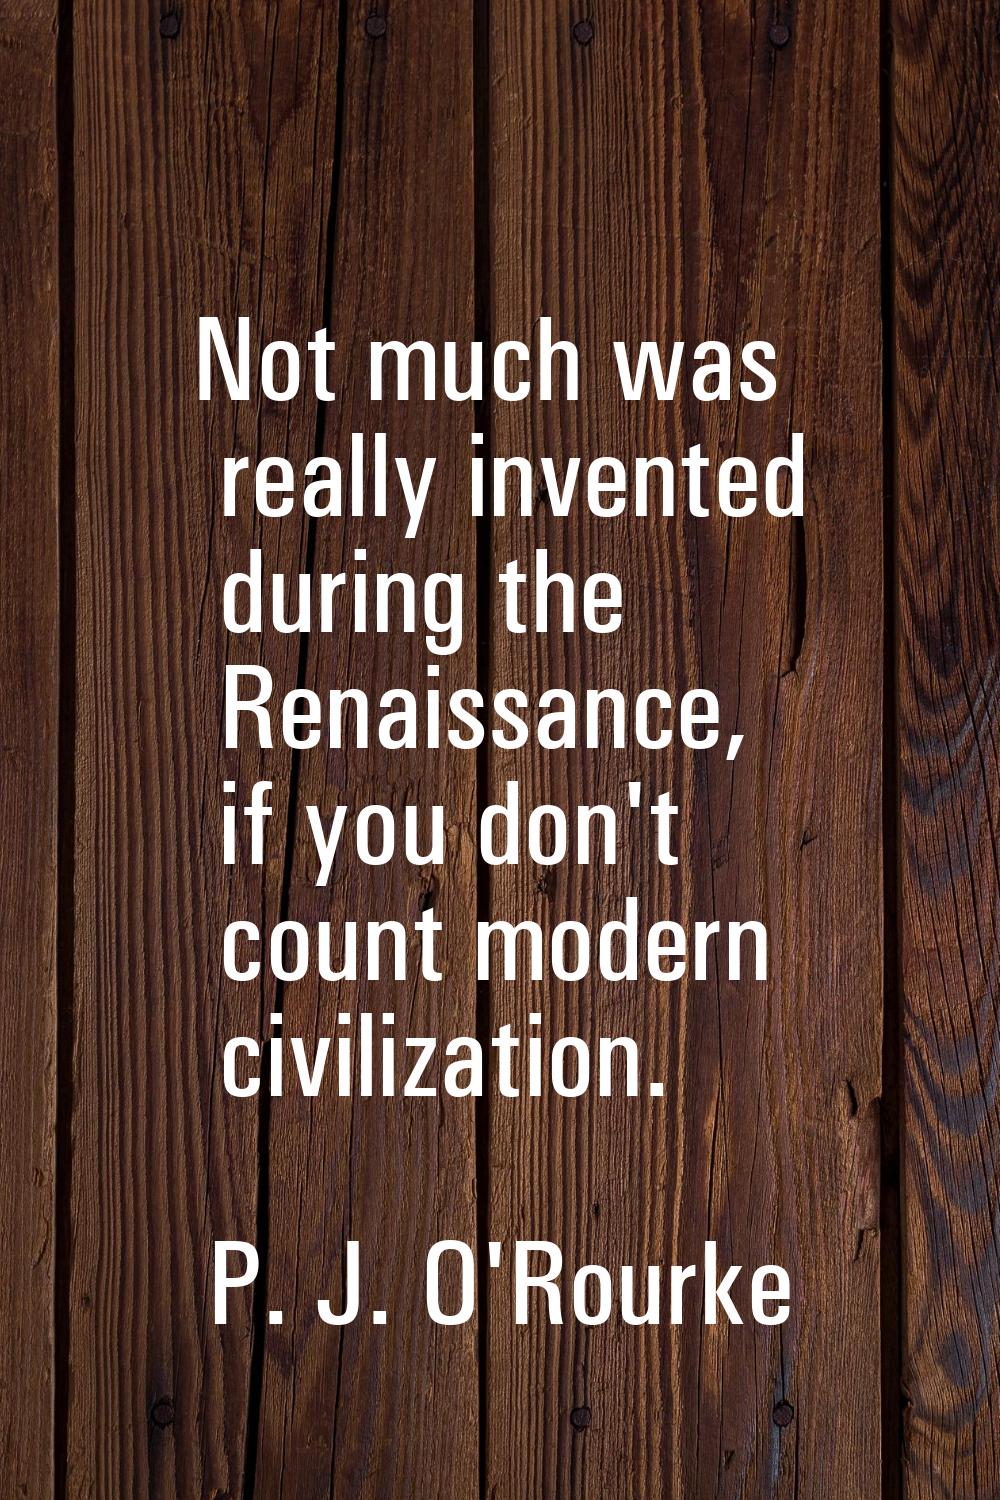 Not much was really invented during the Renaissance, if you don't count modern civilization.